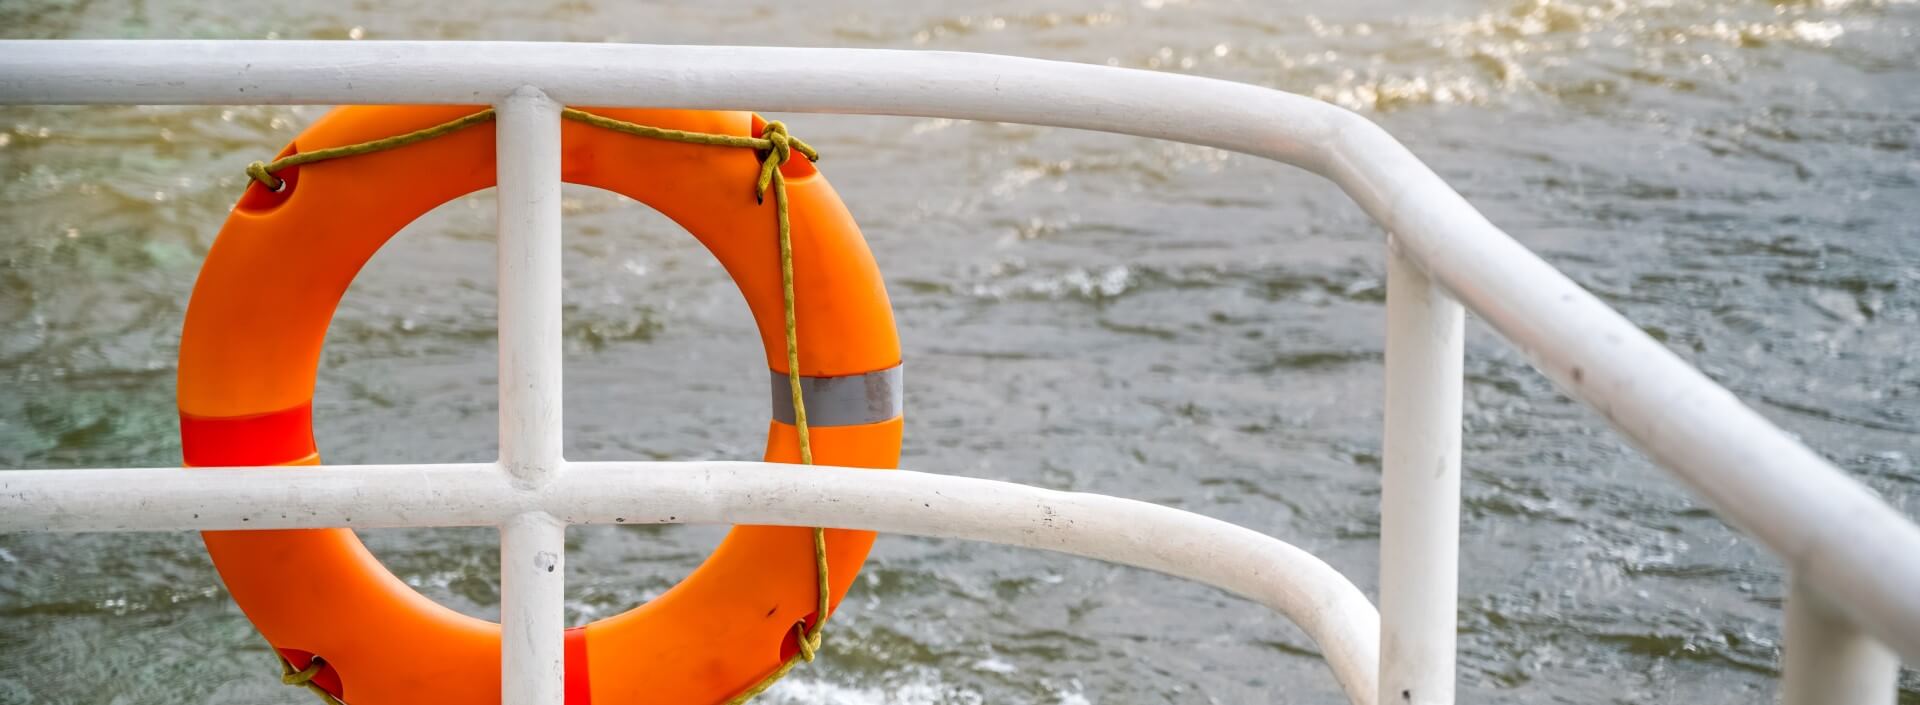 Spotlight on Personal Flotation Devices (PFDs) & Maritime Worker Safety